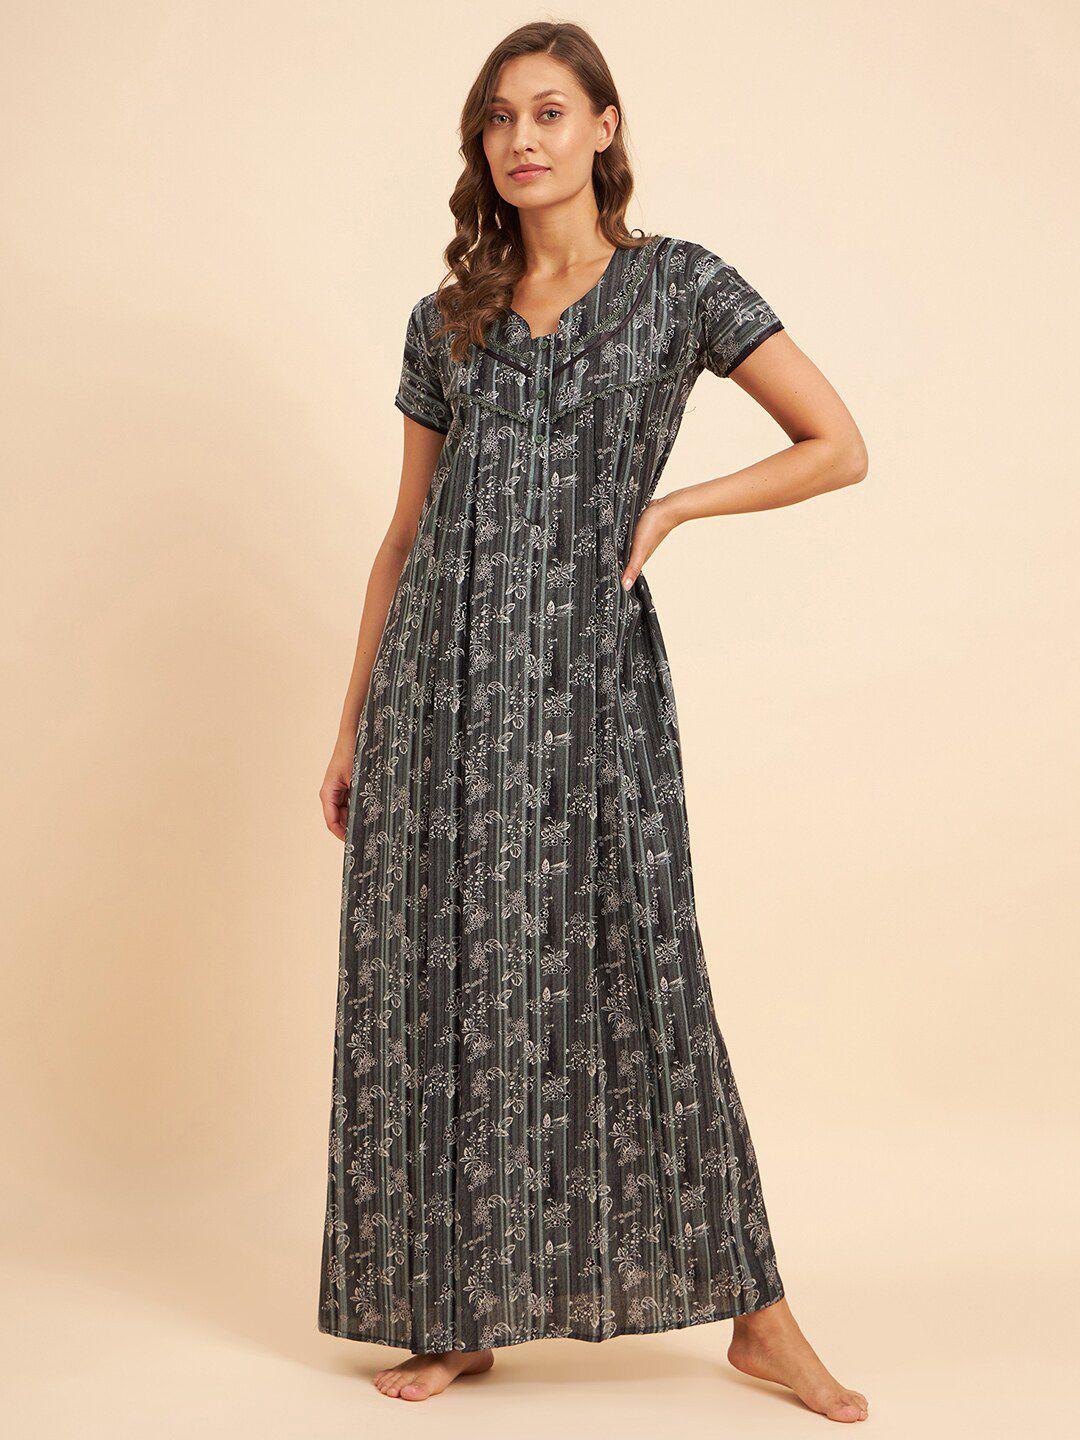 Sweet Dreams Green & White Floral Printed Maxi Nightdress